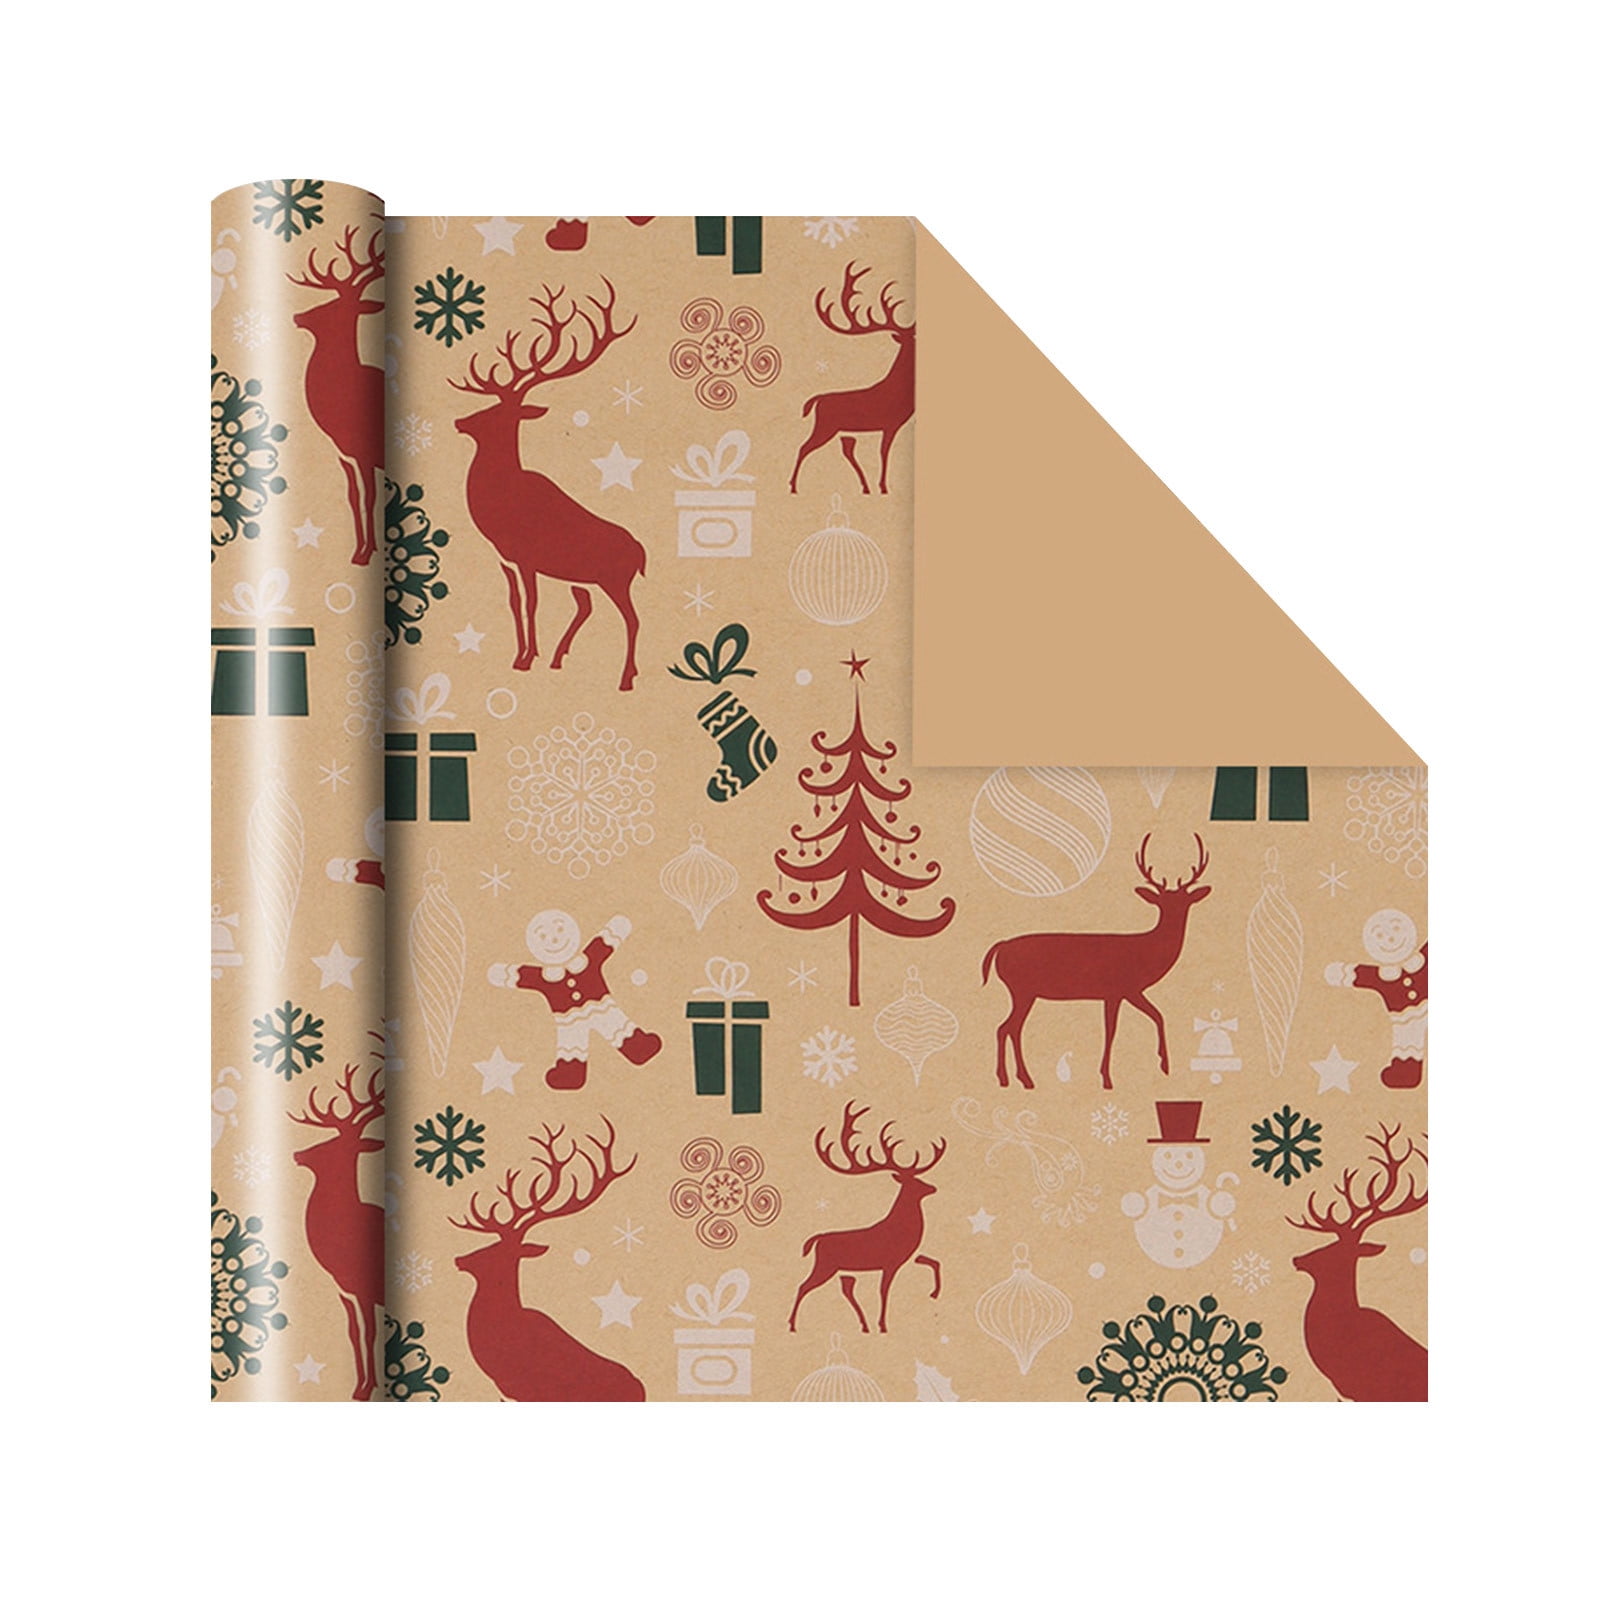  Titiweet Christmas Wrapping Paper - Truck Snowflake Reindeer  Bells Christmas Wrapping Paper, 12 Sheets Christmas Wrapping Paper Clearance,  20 x 28 Inches Per Sheet (Christmas) : Health & Household